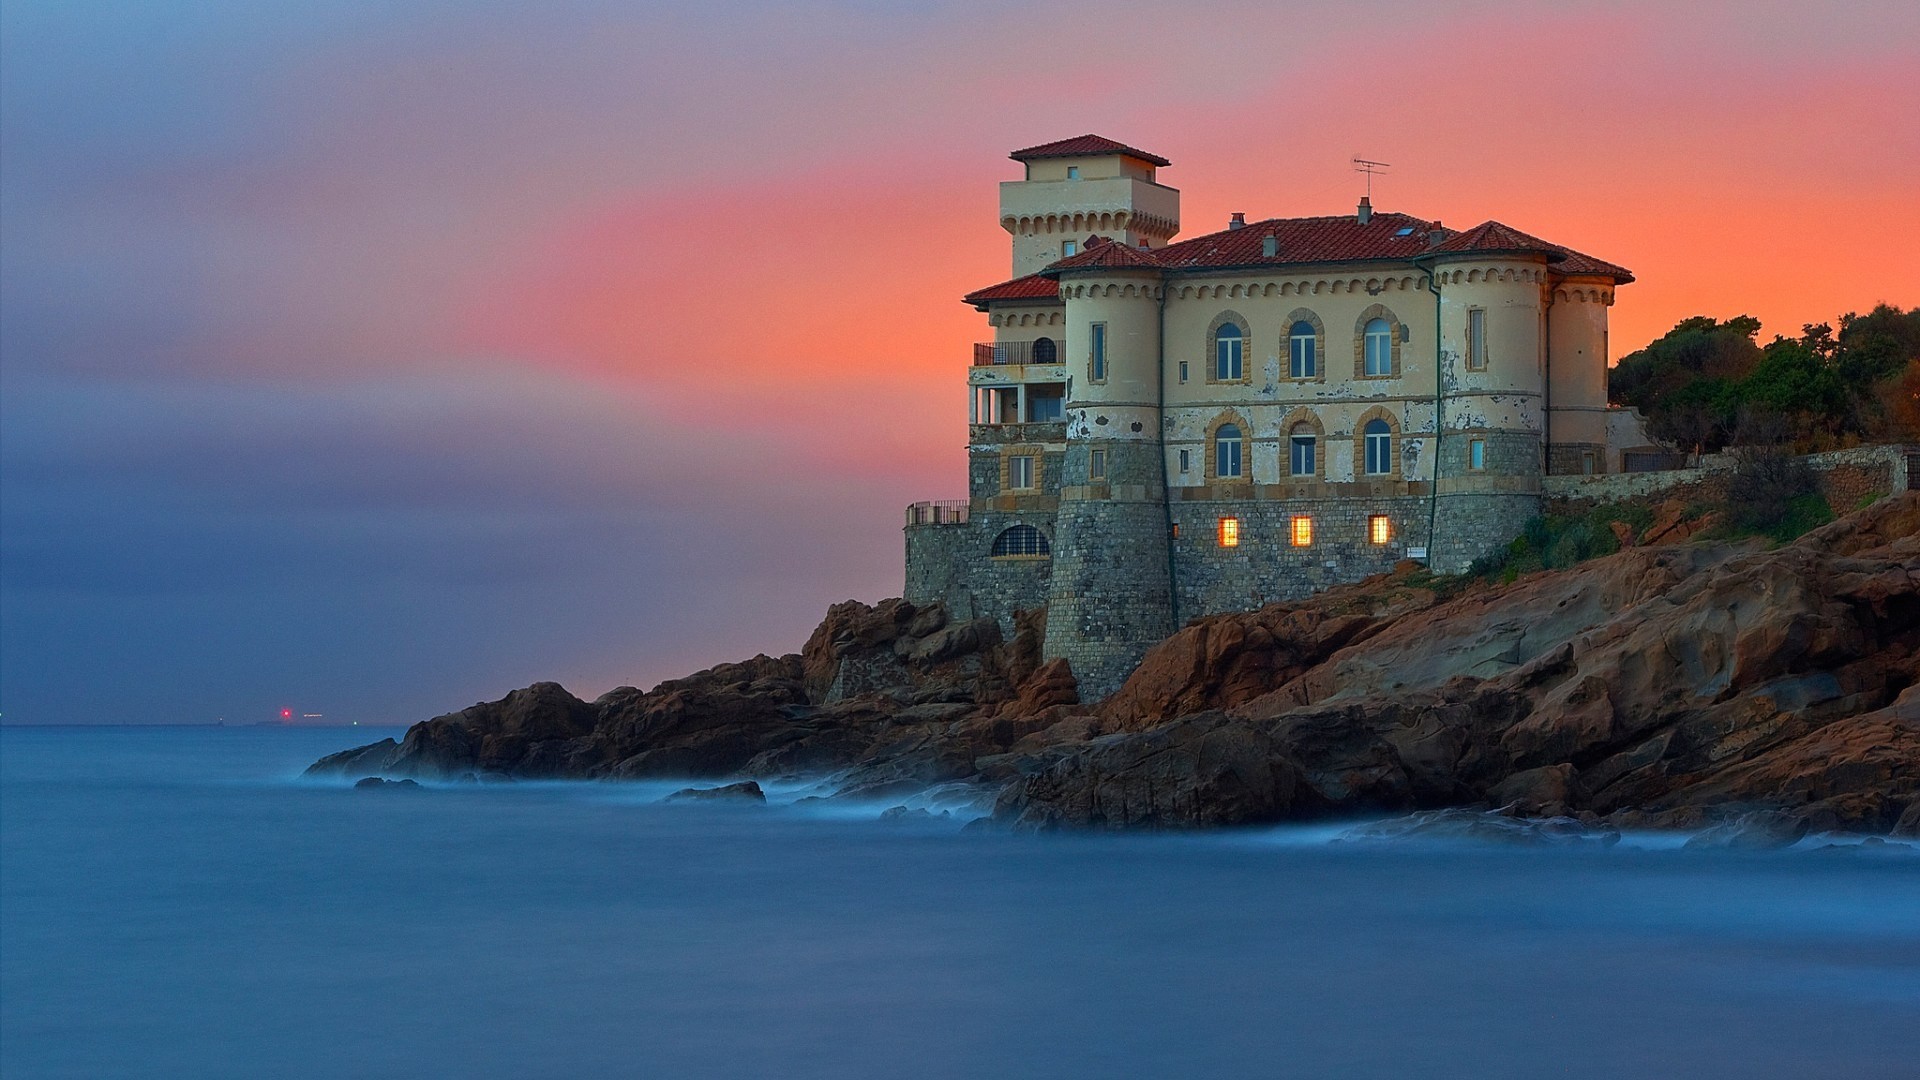 architecture, Building, Old building, Water, Trees, Italy, Castle, Sunset, Sea, Rock, Lights, Evening, Waves, Long exposure, Castello del Boccale Wallpaper